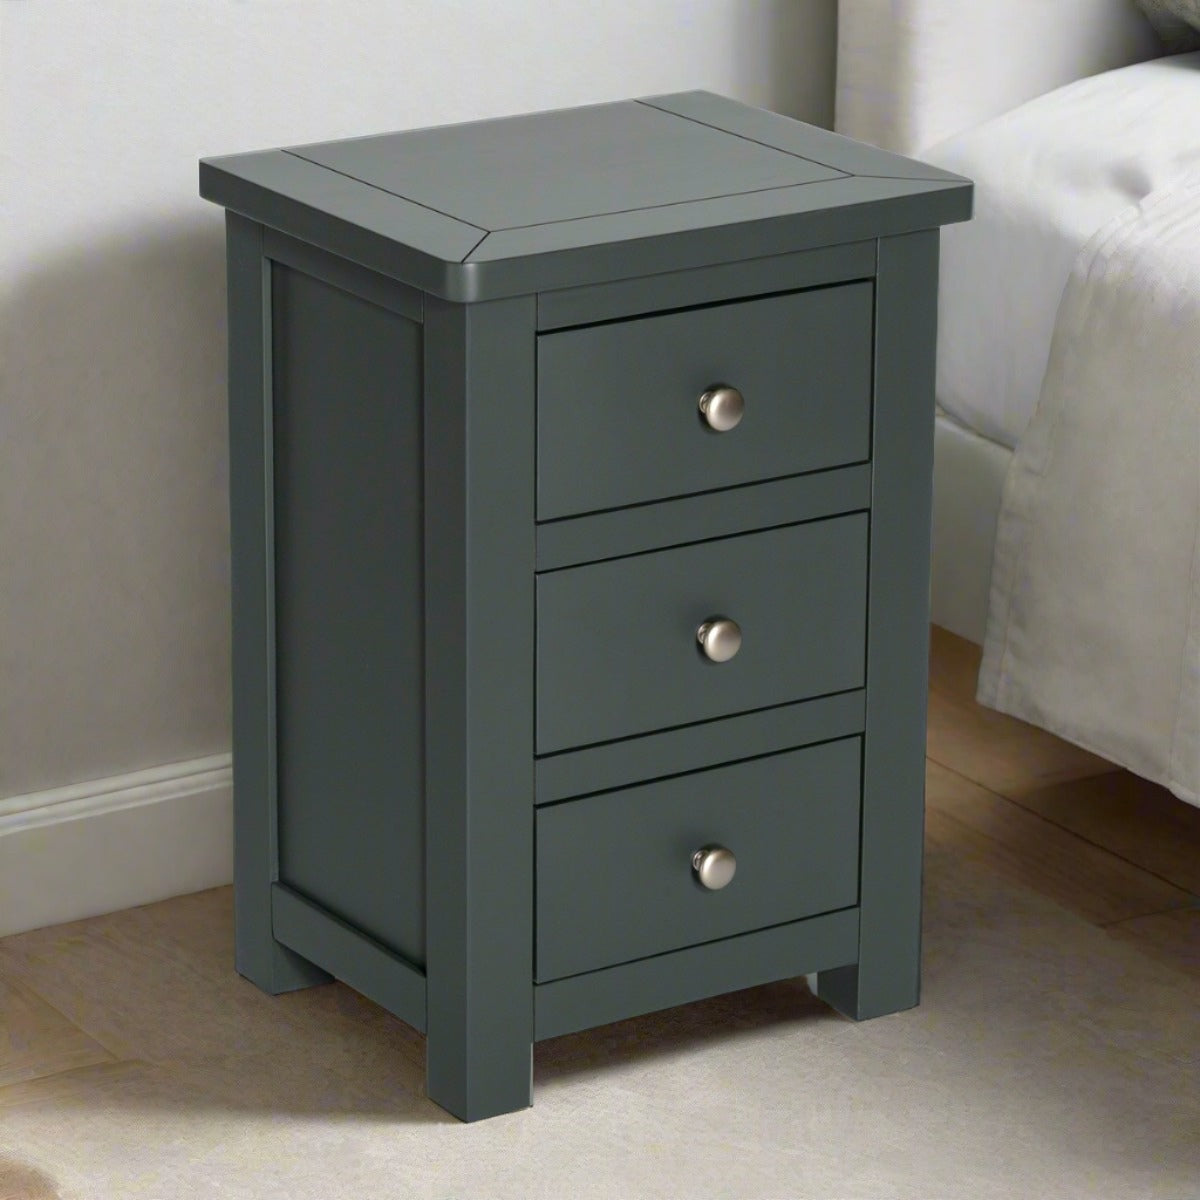 CH-6003-black-dark-charcoal-bedside-table-cabinet-solid-wood-fully-assembled-3drw-simply-bedsides-7